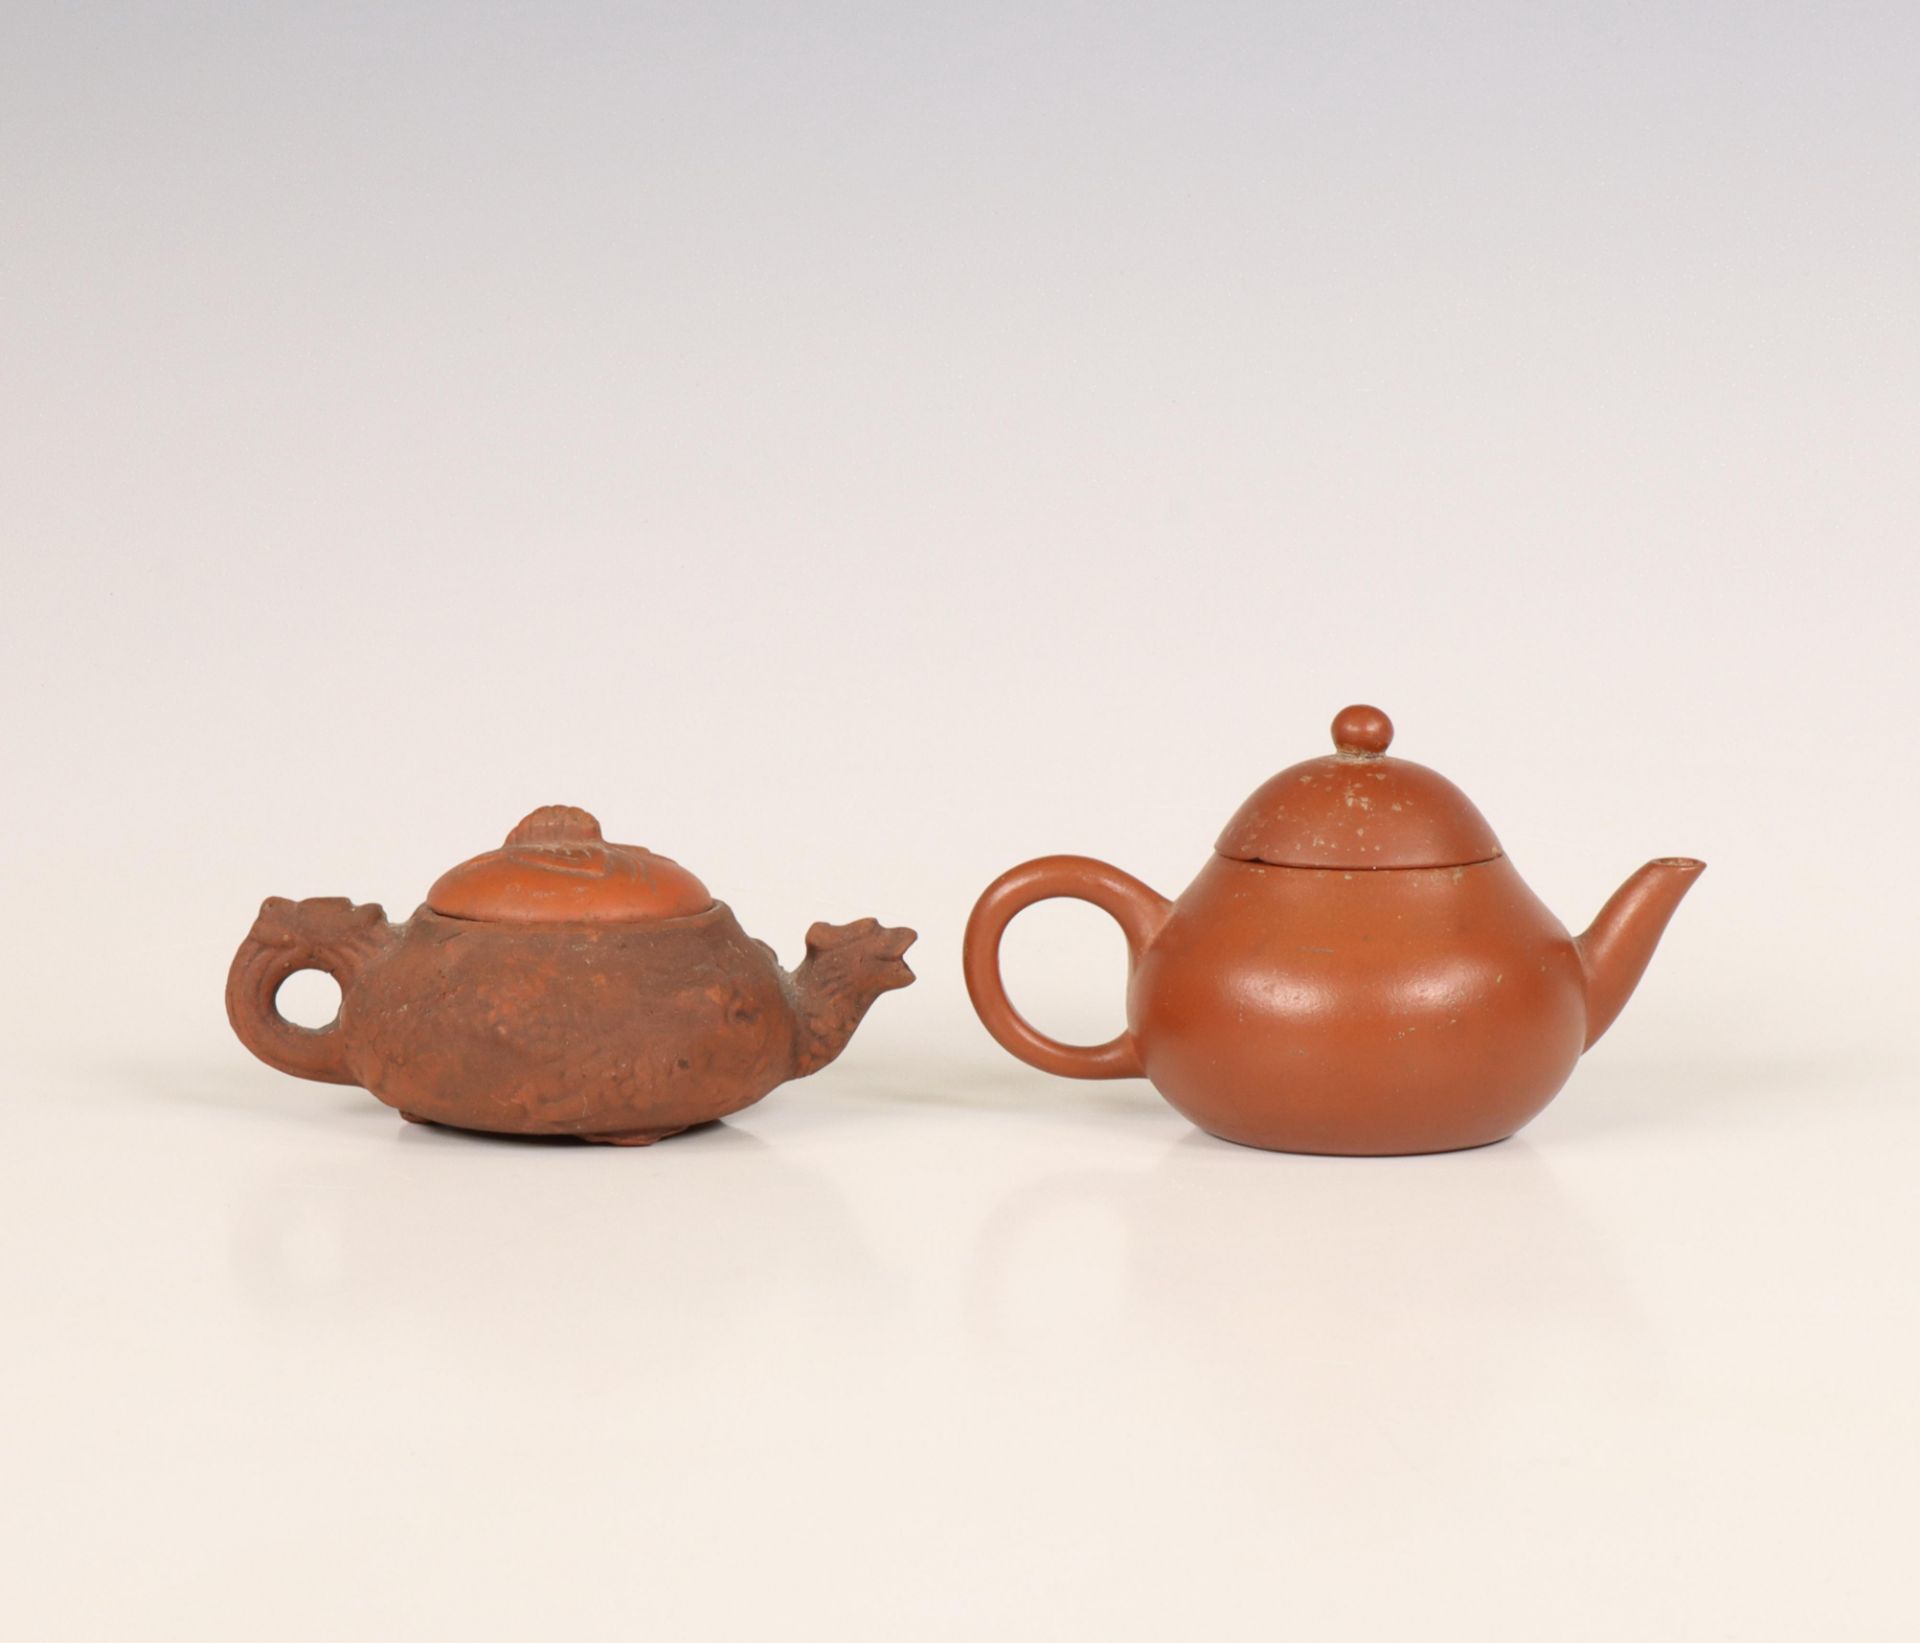 China, two Yixing earthenware teapots, late Qing dynasty (1644-1912), - Image 2 of 6